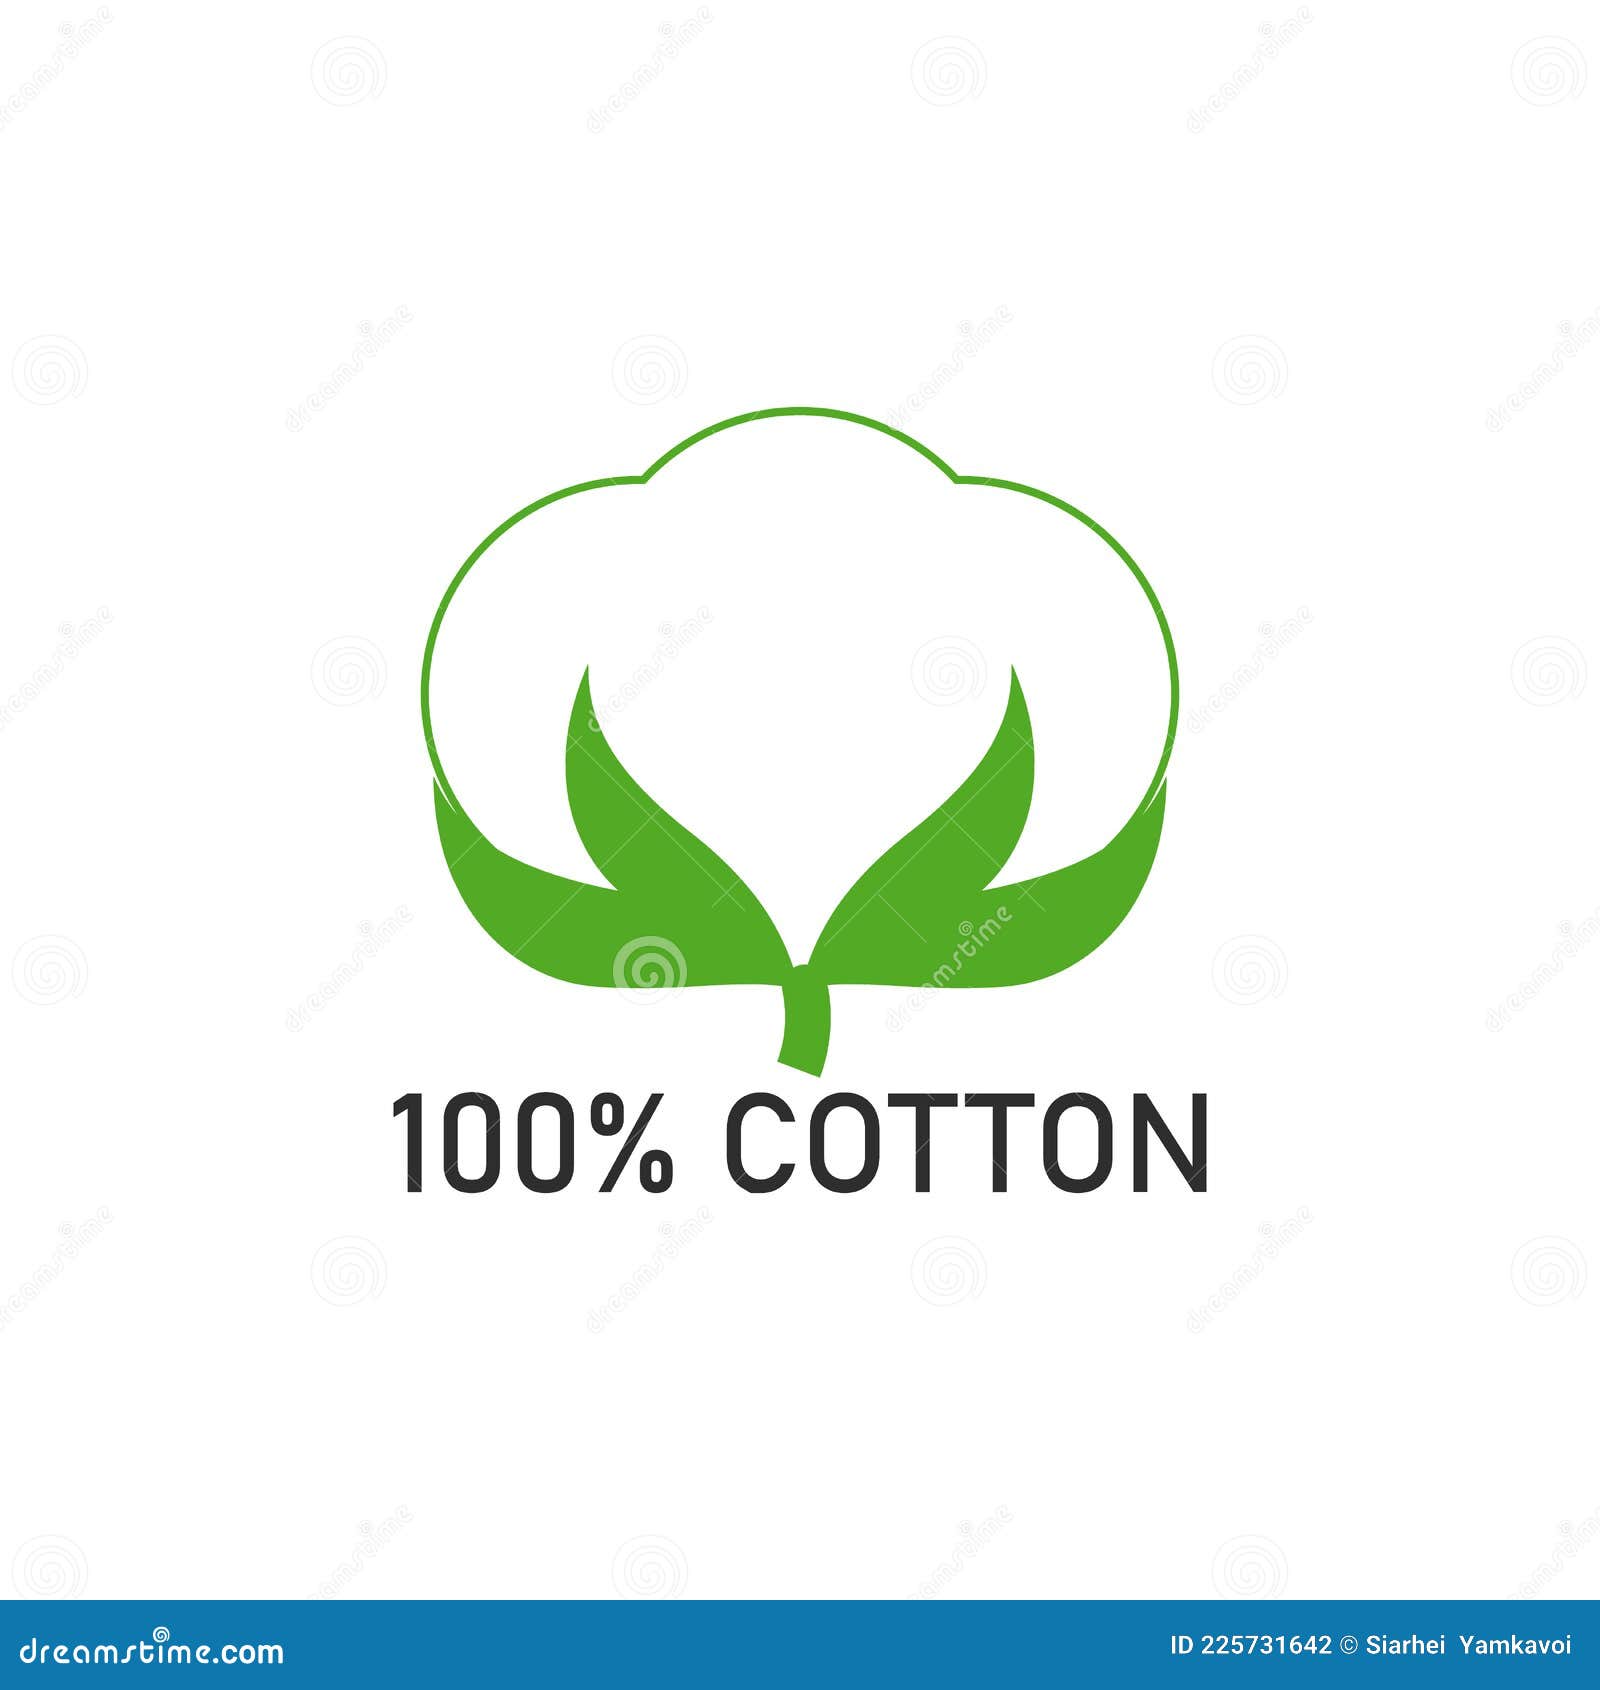 https://thumbs.dreamstime.com/z/percent-cotton-fabric-vector-label-icon-blank-background-isolated-drawing-percent-cotton-fabric-vector-label-icon-225731642.jpg